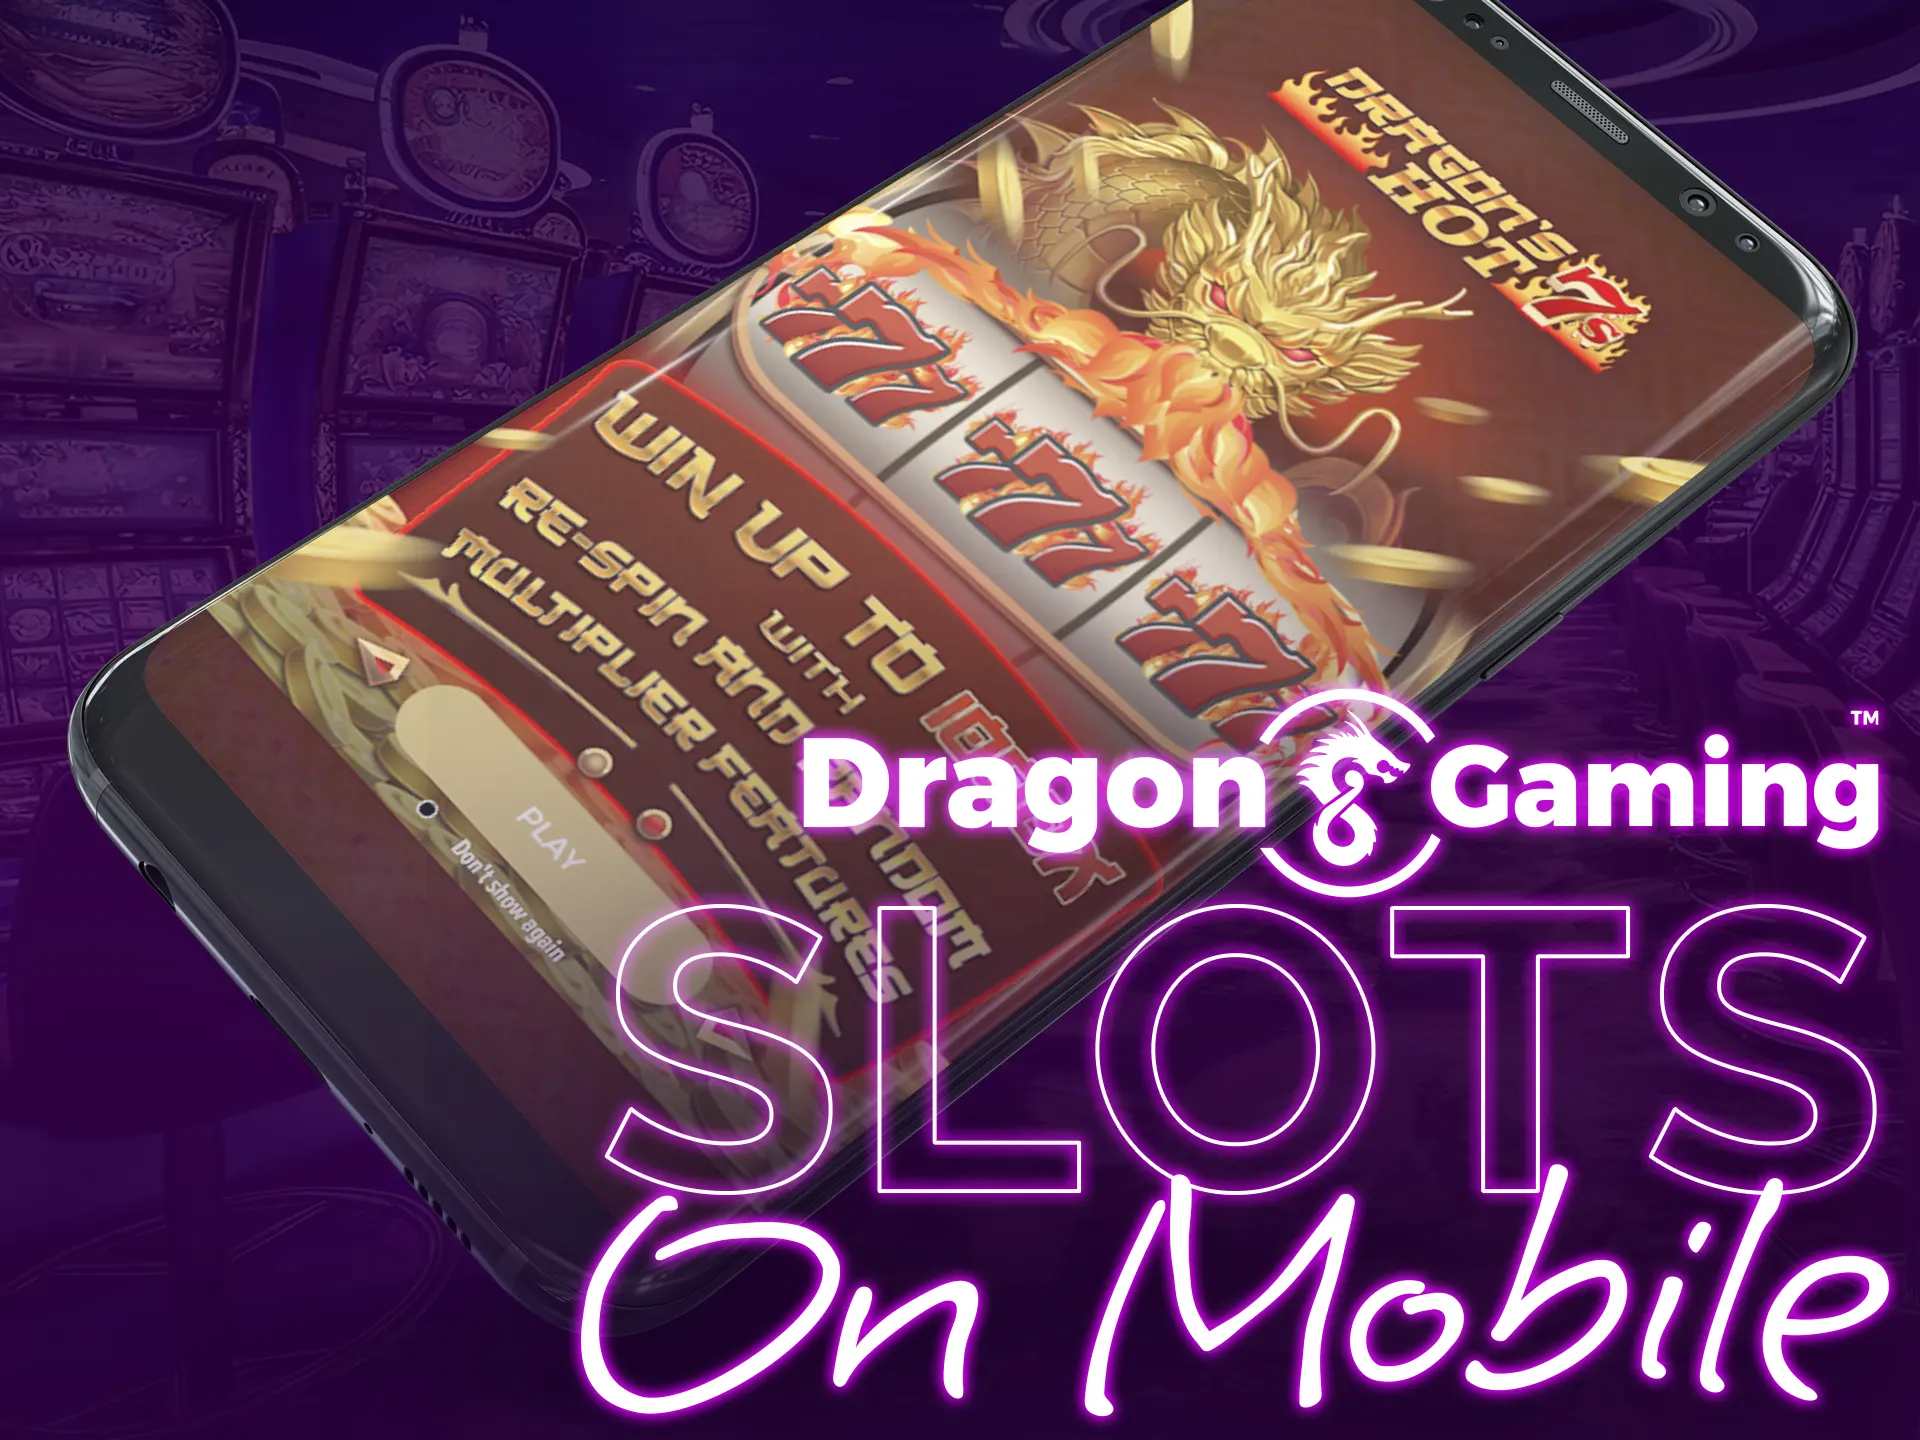 Enjoy Dragon Gaming slots seamlessly on mobile devices with app.